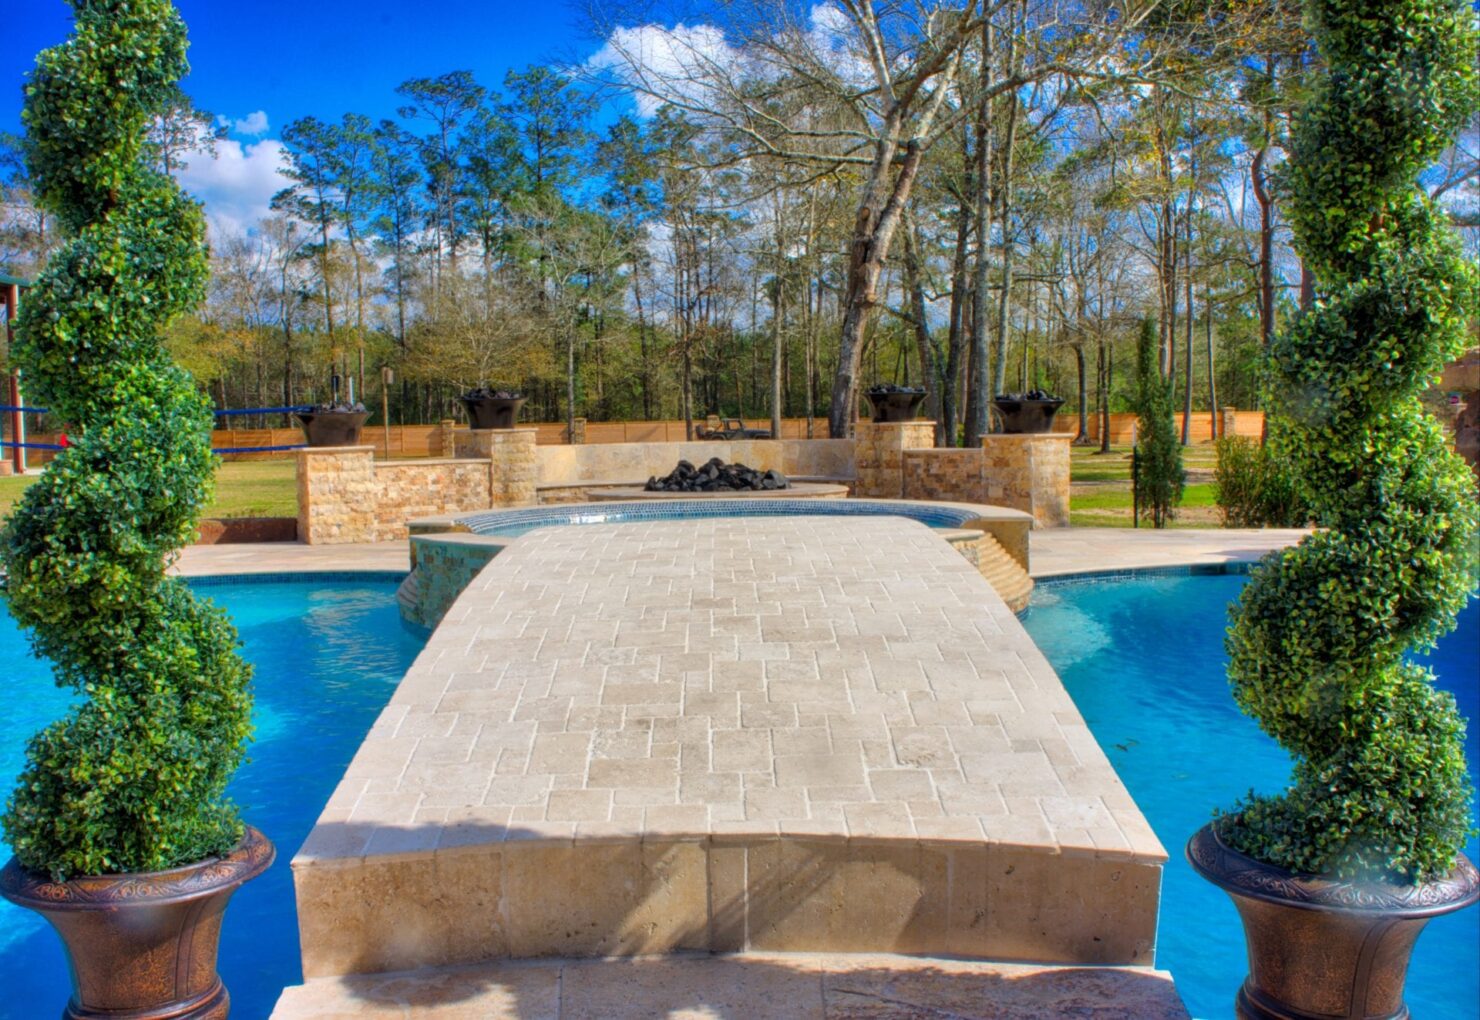 A large pool with a stone bench in the middle of it.